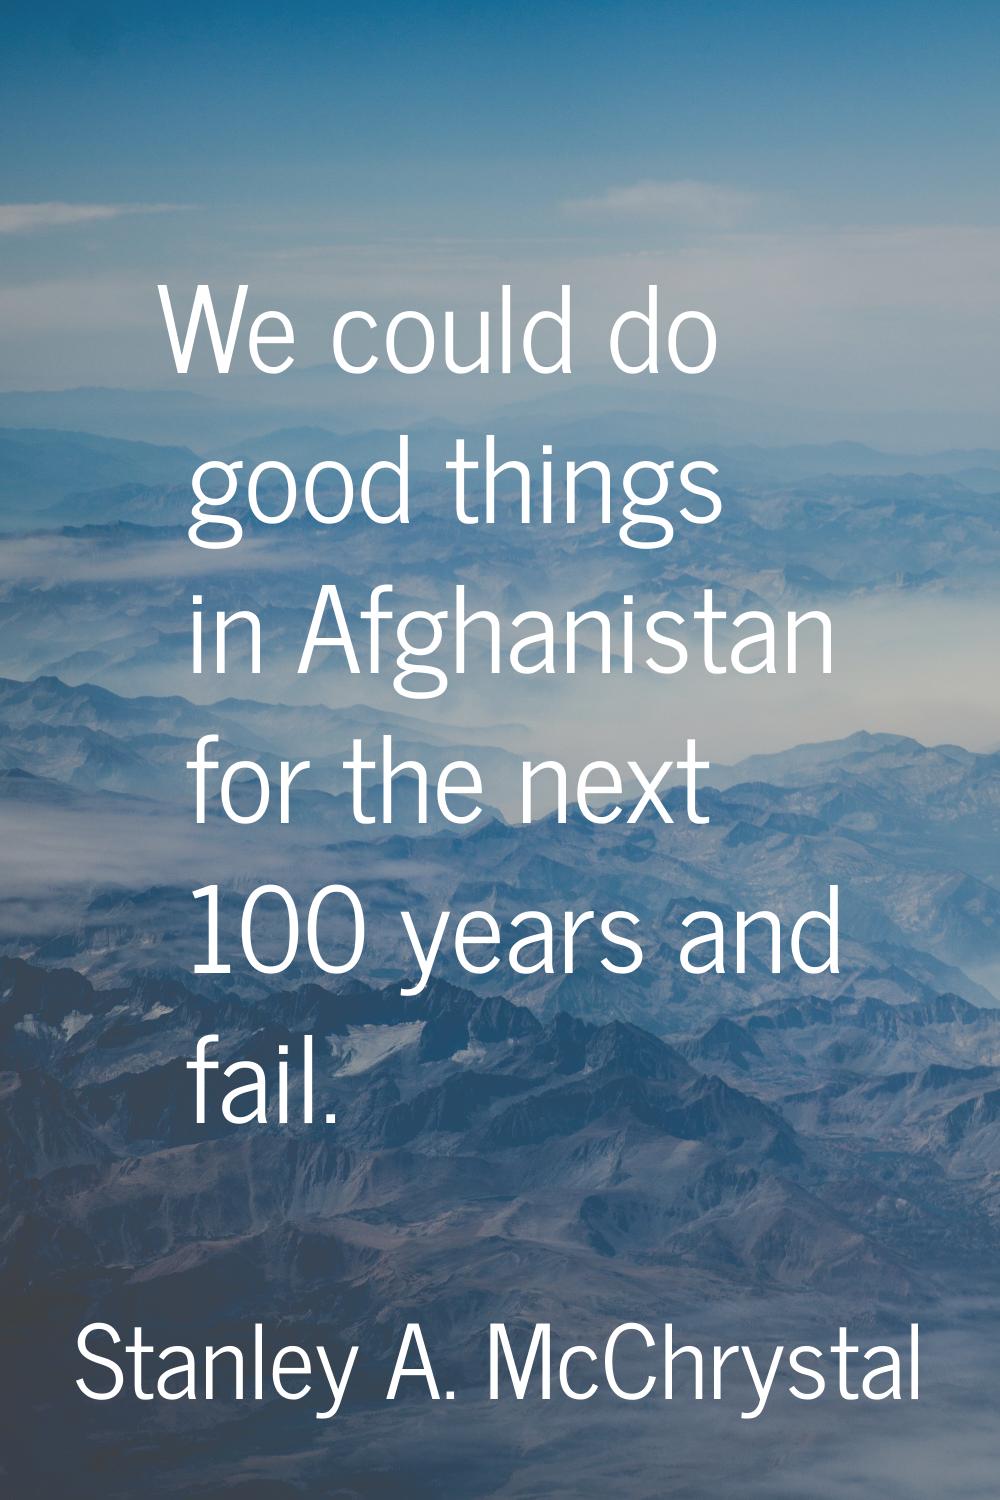 We could do good things in Afghanistan for the next 100 years and fail.